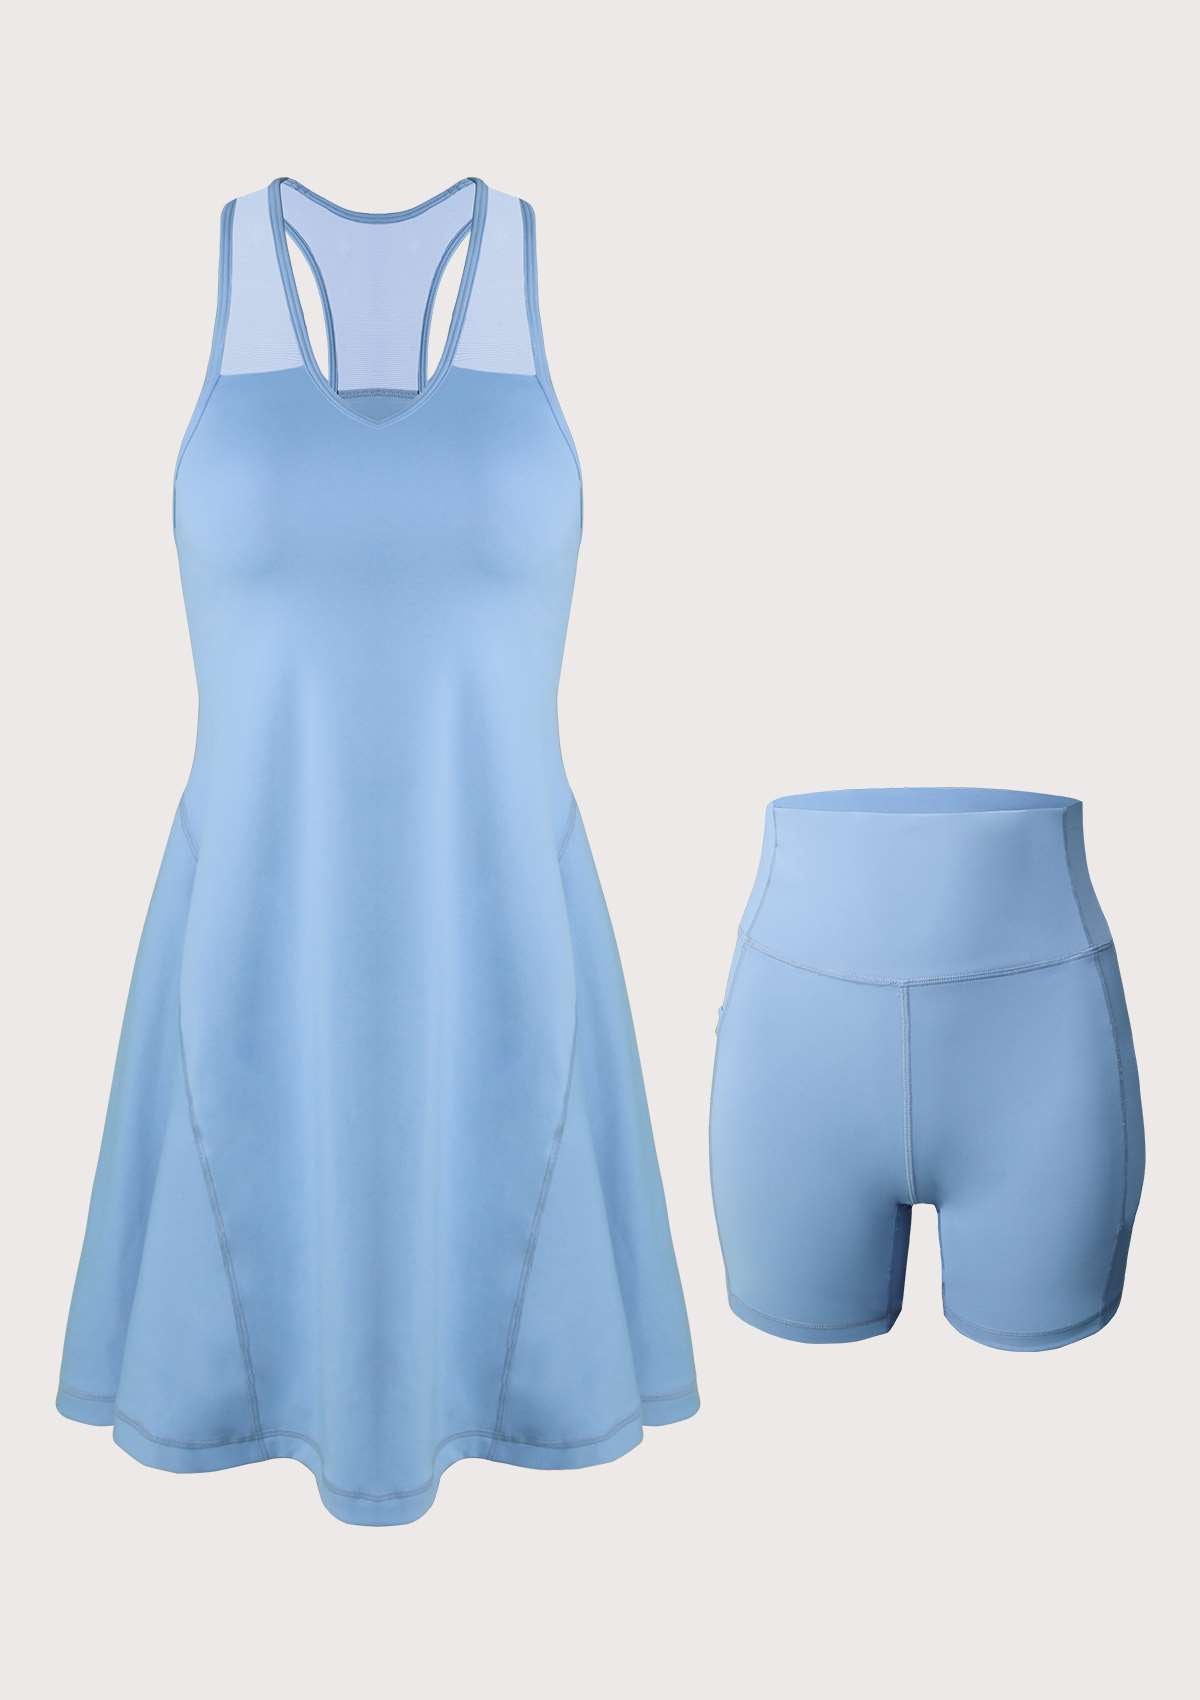 SONGFUL On The Move Sports Dress With Shorts Set - M / Blue